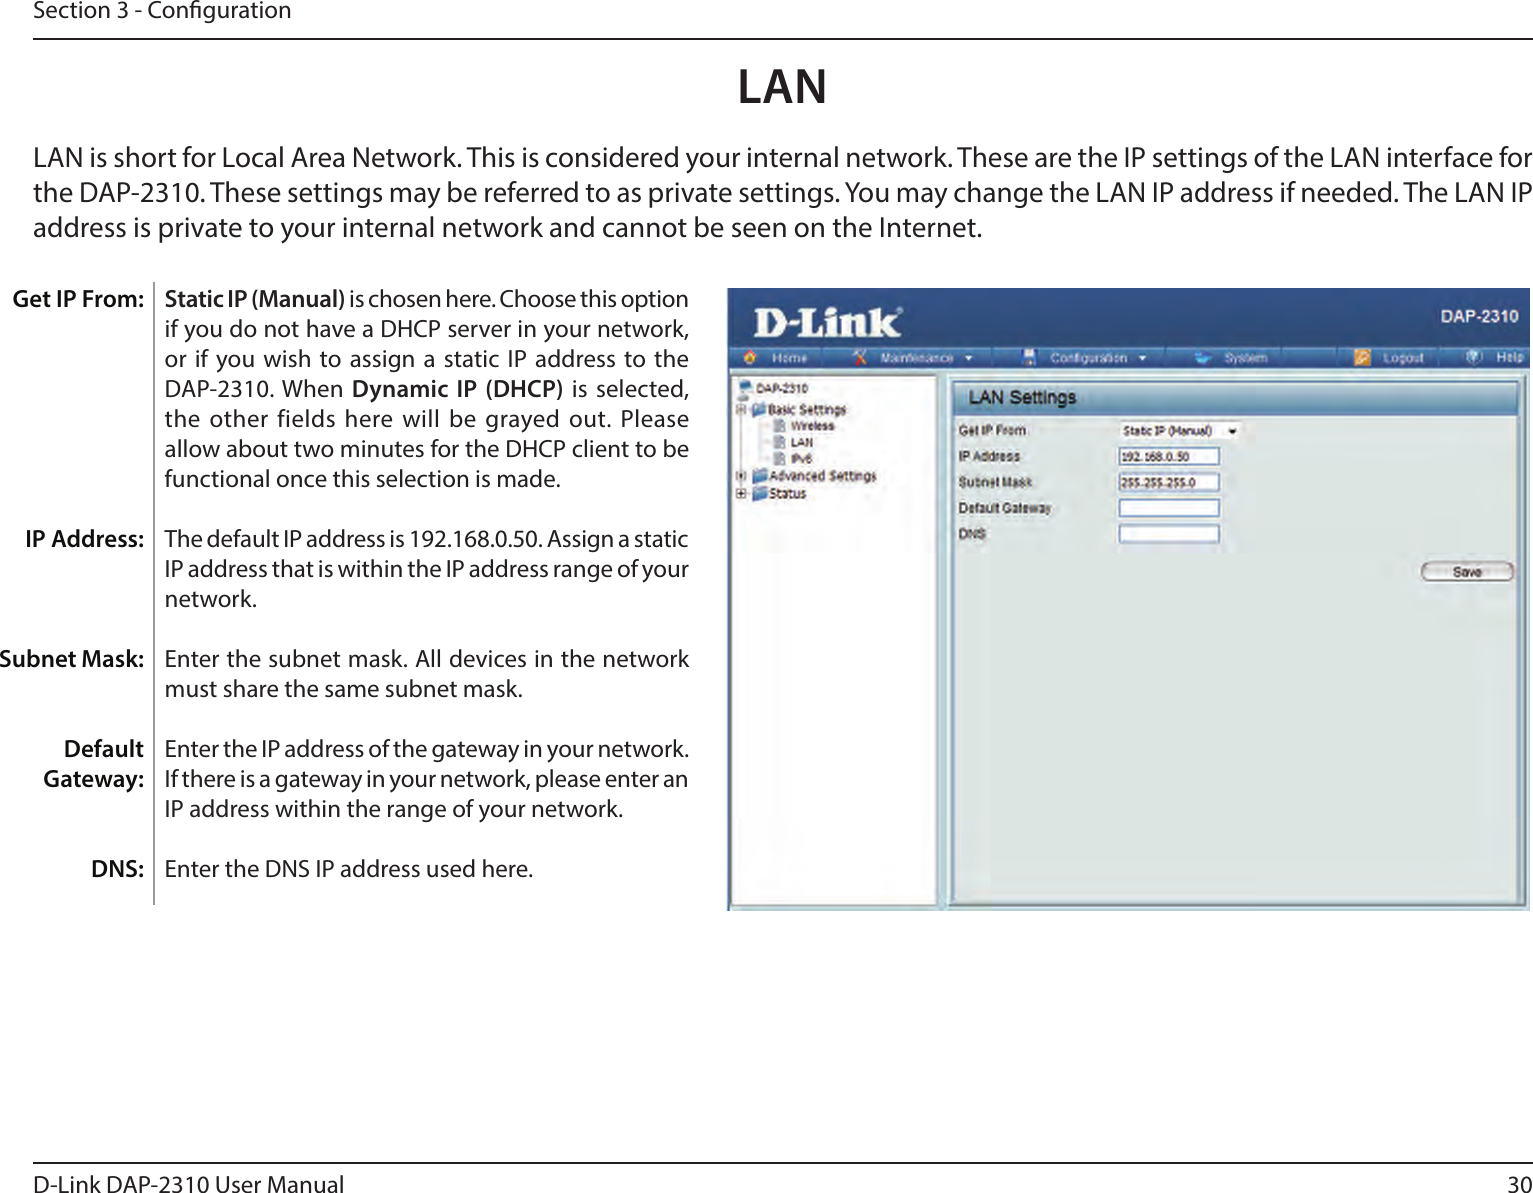 30D-Link DAP-2310 User ManualSection 3 - CongurationStatic IP (Manual) is chosen here. Choose this option if you do not have a DHCP server in your network, or if you wish to assign a  static IP  address to  the DAP-2310. When Dynamic IP (DHCP) is selected, the other fields here will  be grayed out. Please allow about two minutes for the DHCP client to be functional once this selection is made. The default IP address is 192.168.0.50. Assign a static IP address that is within the IP address range of your network.Enter the subnet mask. All devices in the network must share the same subnet mask.Enter the IP address of the gateway in your network. If there is a gateway in your network, please enter an IP address within the range of your network.Enter the DNS IP address used here.LAN Get IP From:IP Address:Subnet Mask:Default Gateway:DNS: LAN is short for Local Area Network. This is considered your internal network. These are the IP settings of the LAN interface for the DAP-2310. These settings may be referred to as private settings. You may change the LAN IP address if needed. The LAN IP address is private to your internal network and cannot be seen on the Internet.